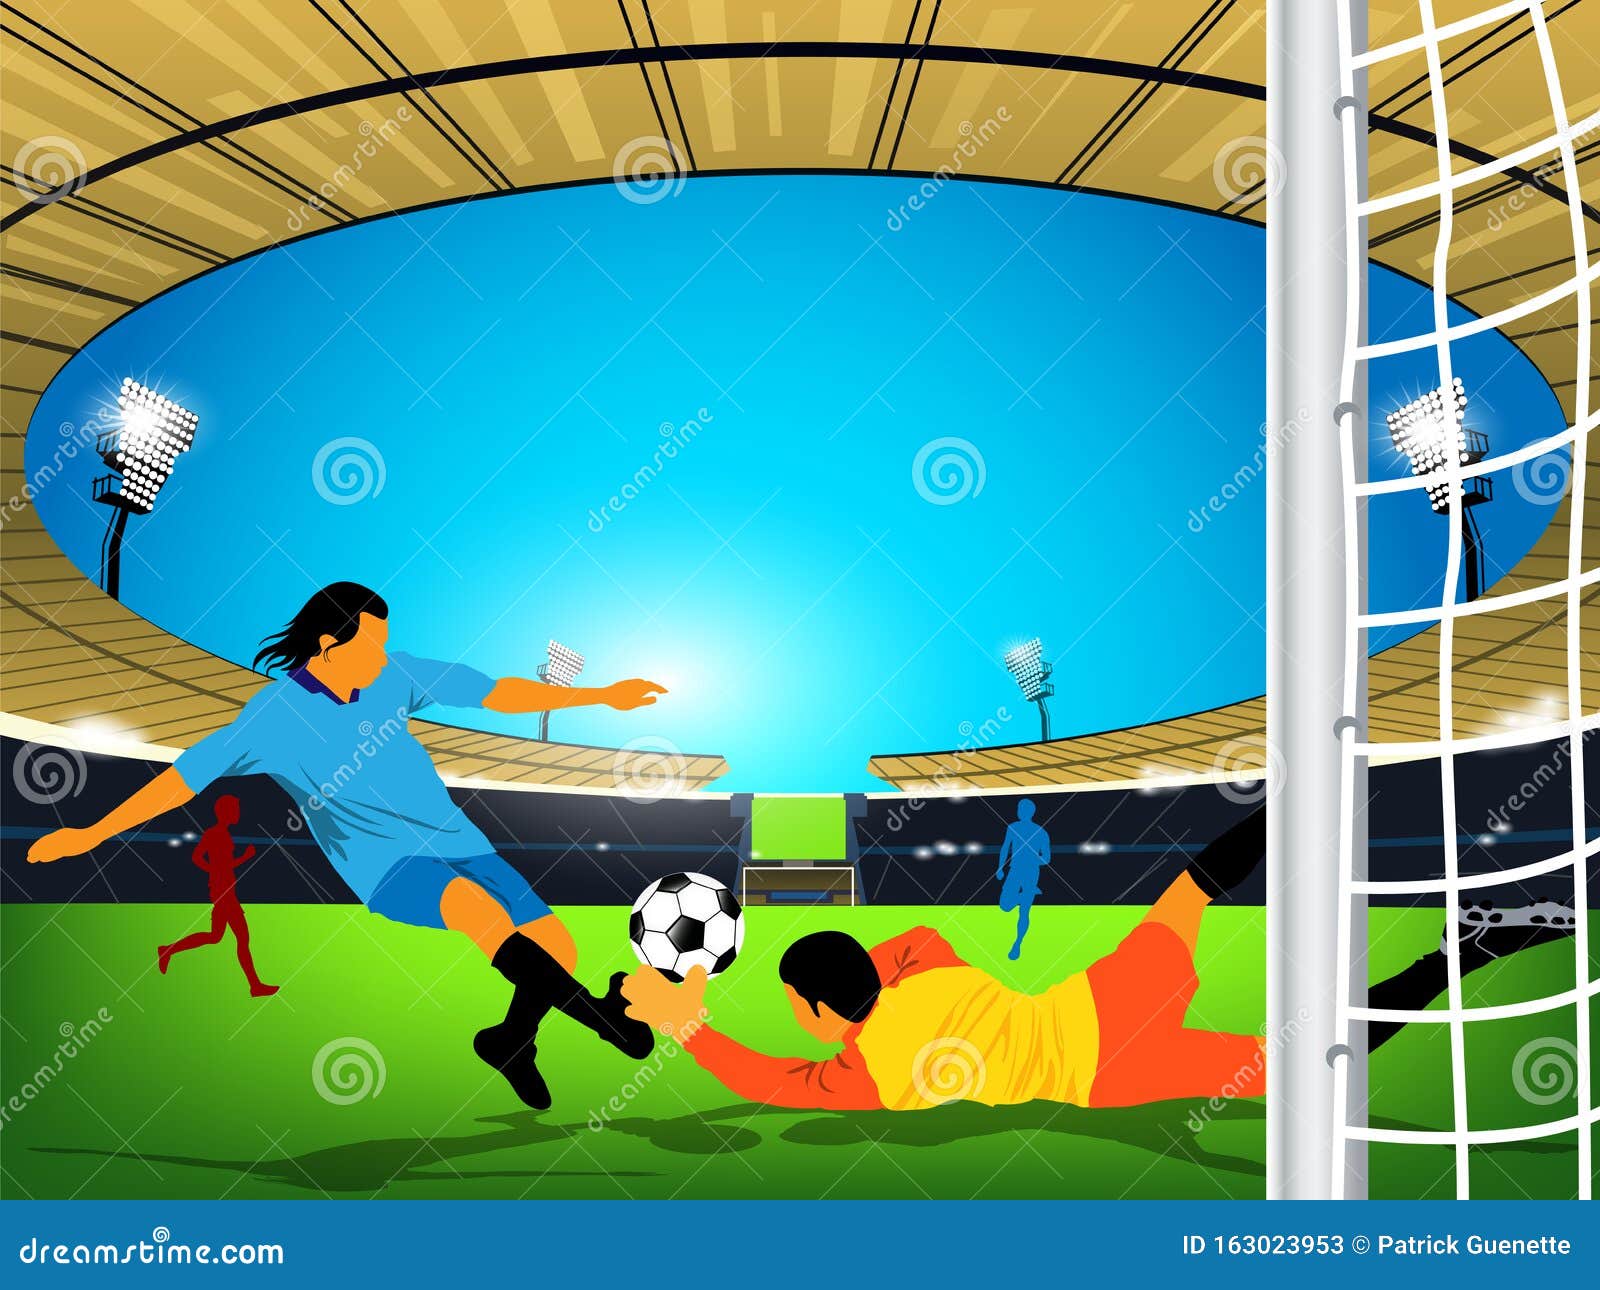 Soccer Game In An Outdoor Stadium A Kick At The Opposing Team Goal Stock Vector Illustration Of Flash Light